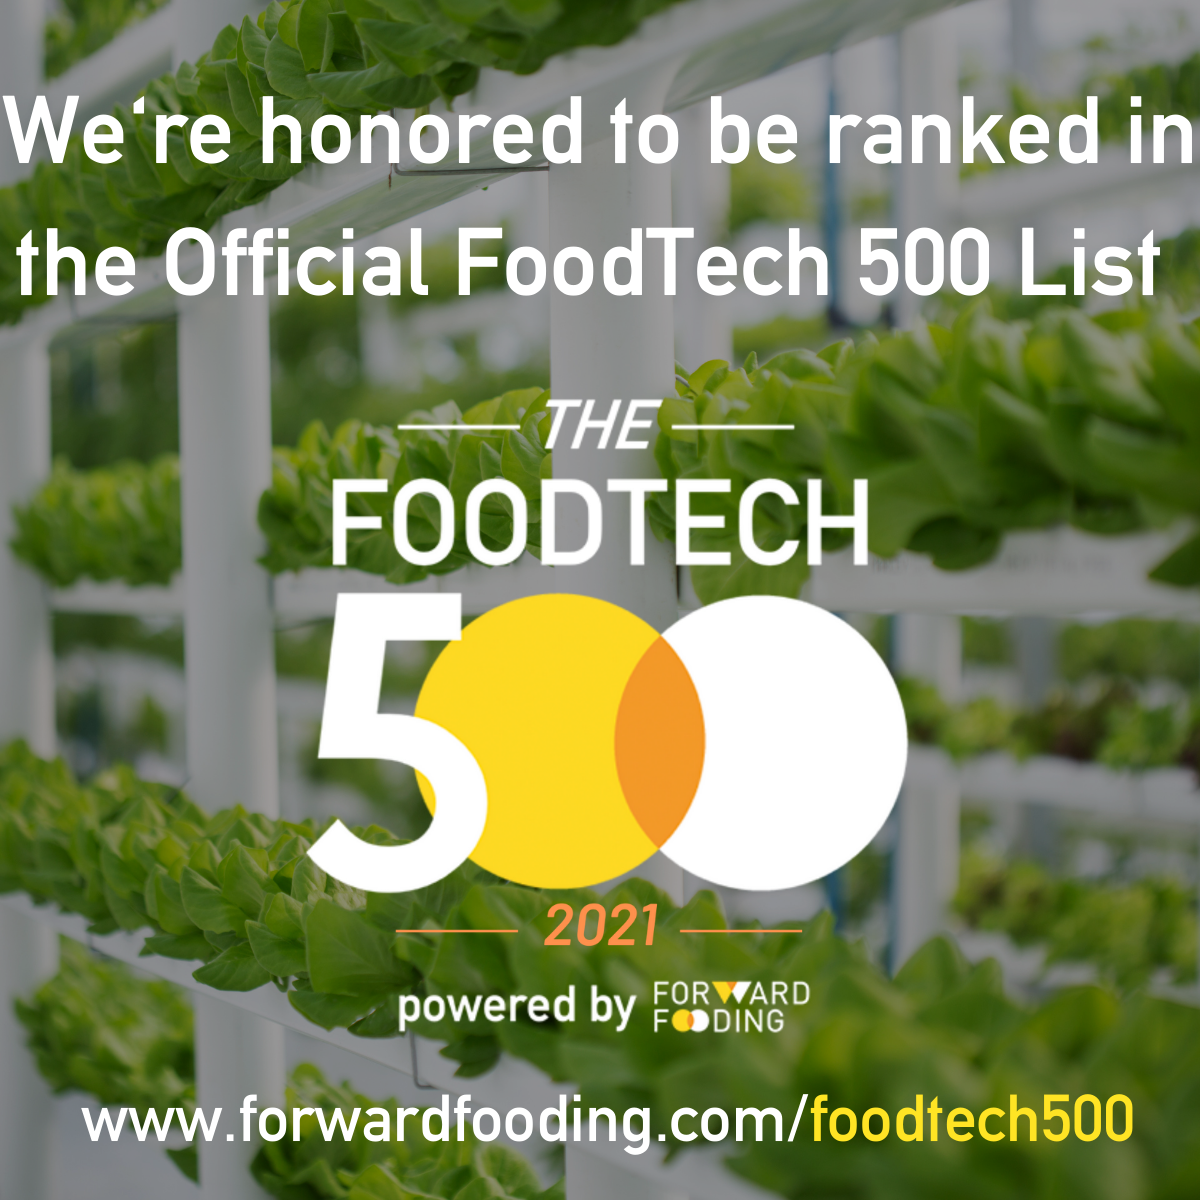 We made it! LST joins the FoodTech 500 elite